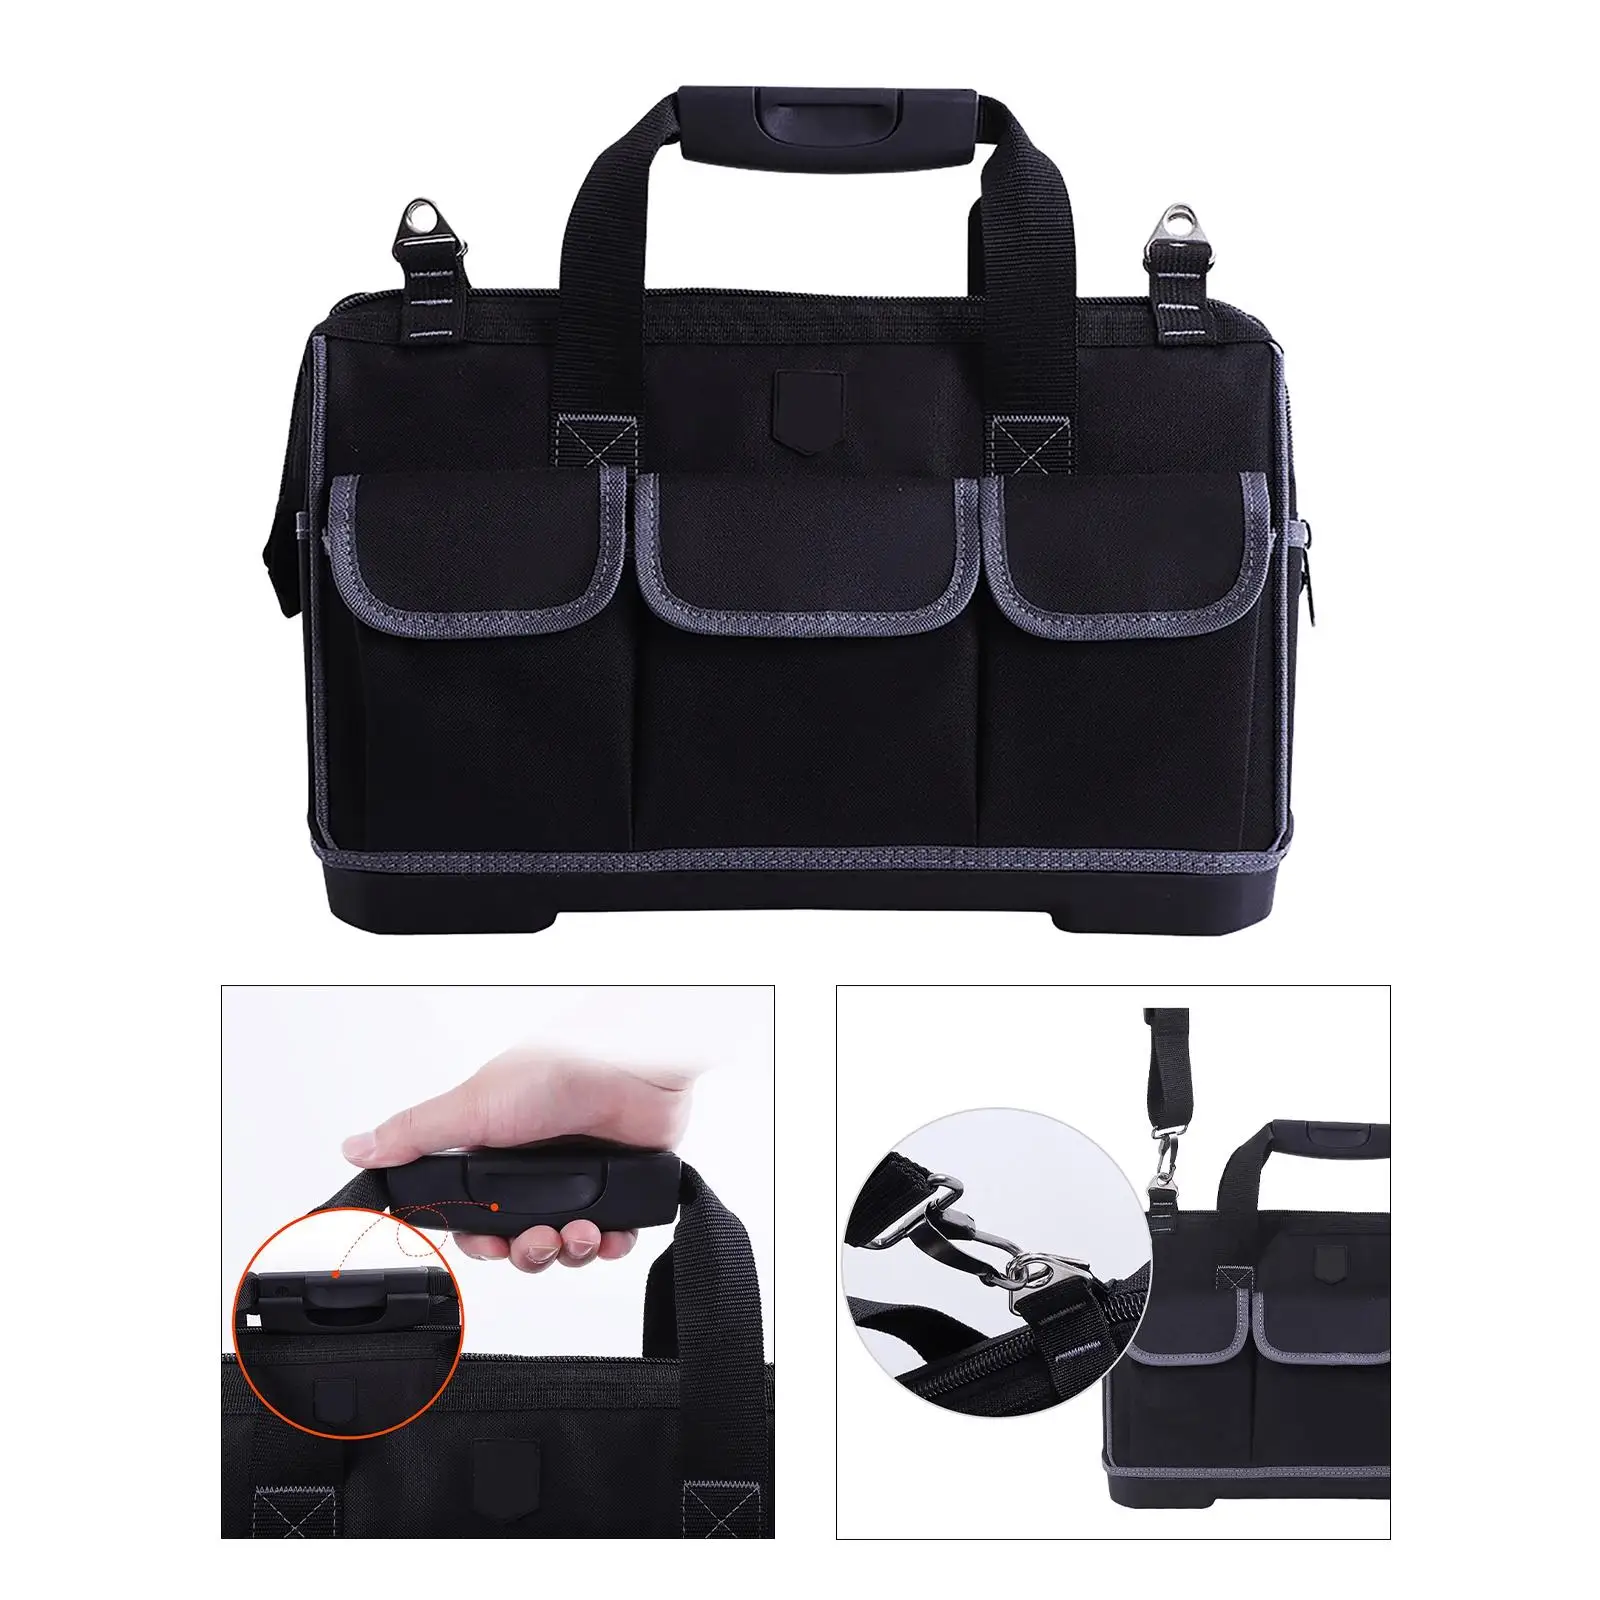 Portable Tool Bag Large Capacity Working Tool Bag for Mechanical Essentials Camping Gear